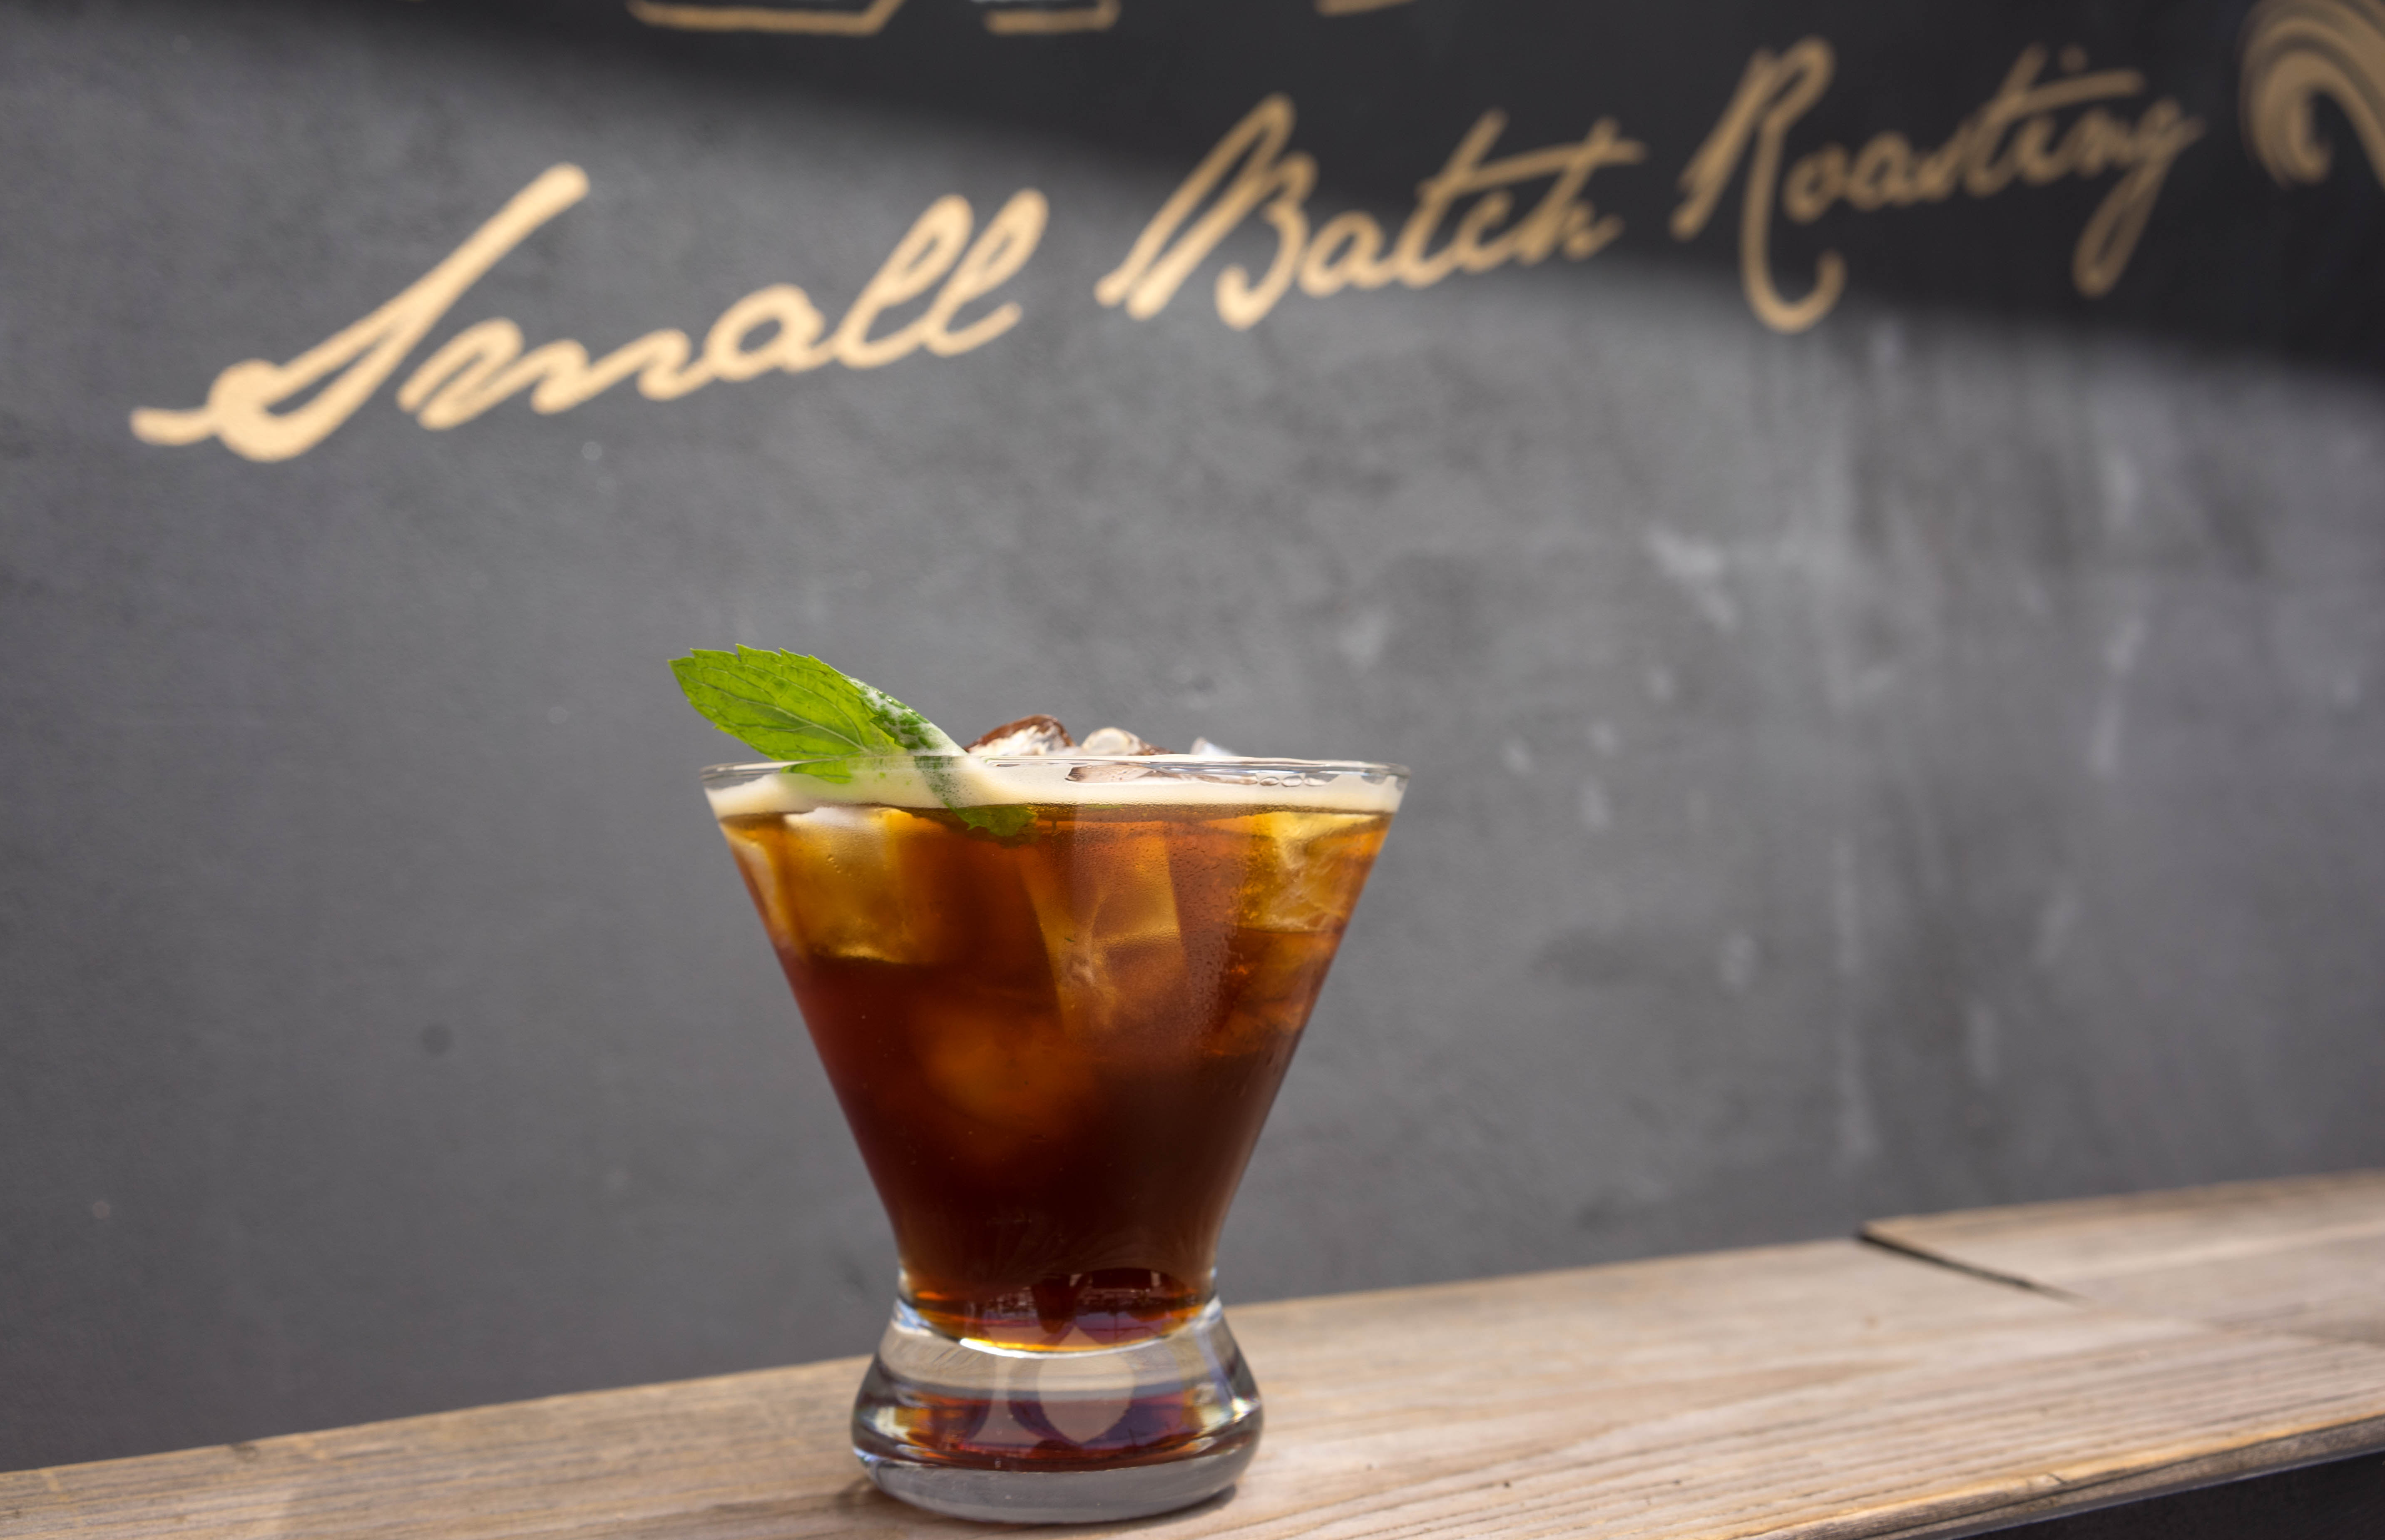 The Secale Smash ($5.50) made with Whiskey Cold Brew aged in Laws Secale Barrels, blueberry, sage and citrus.